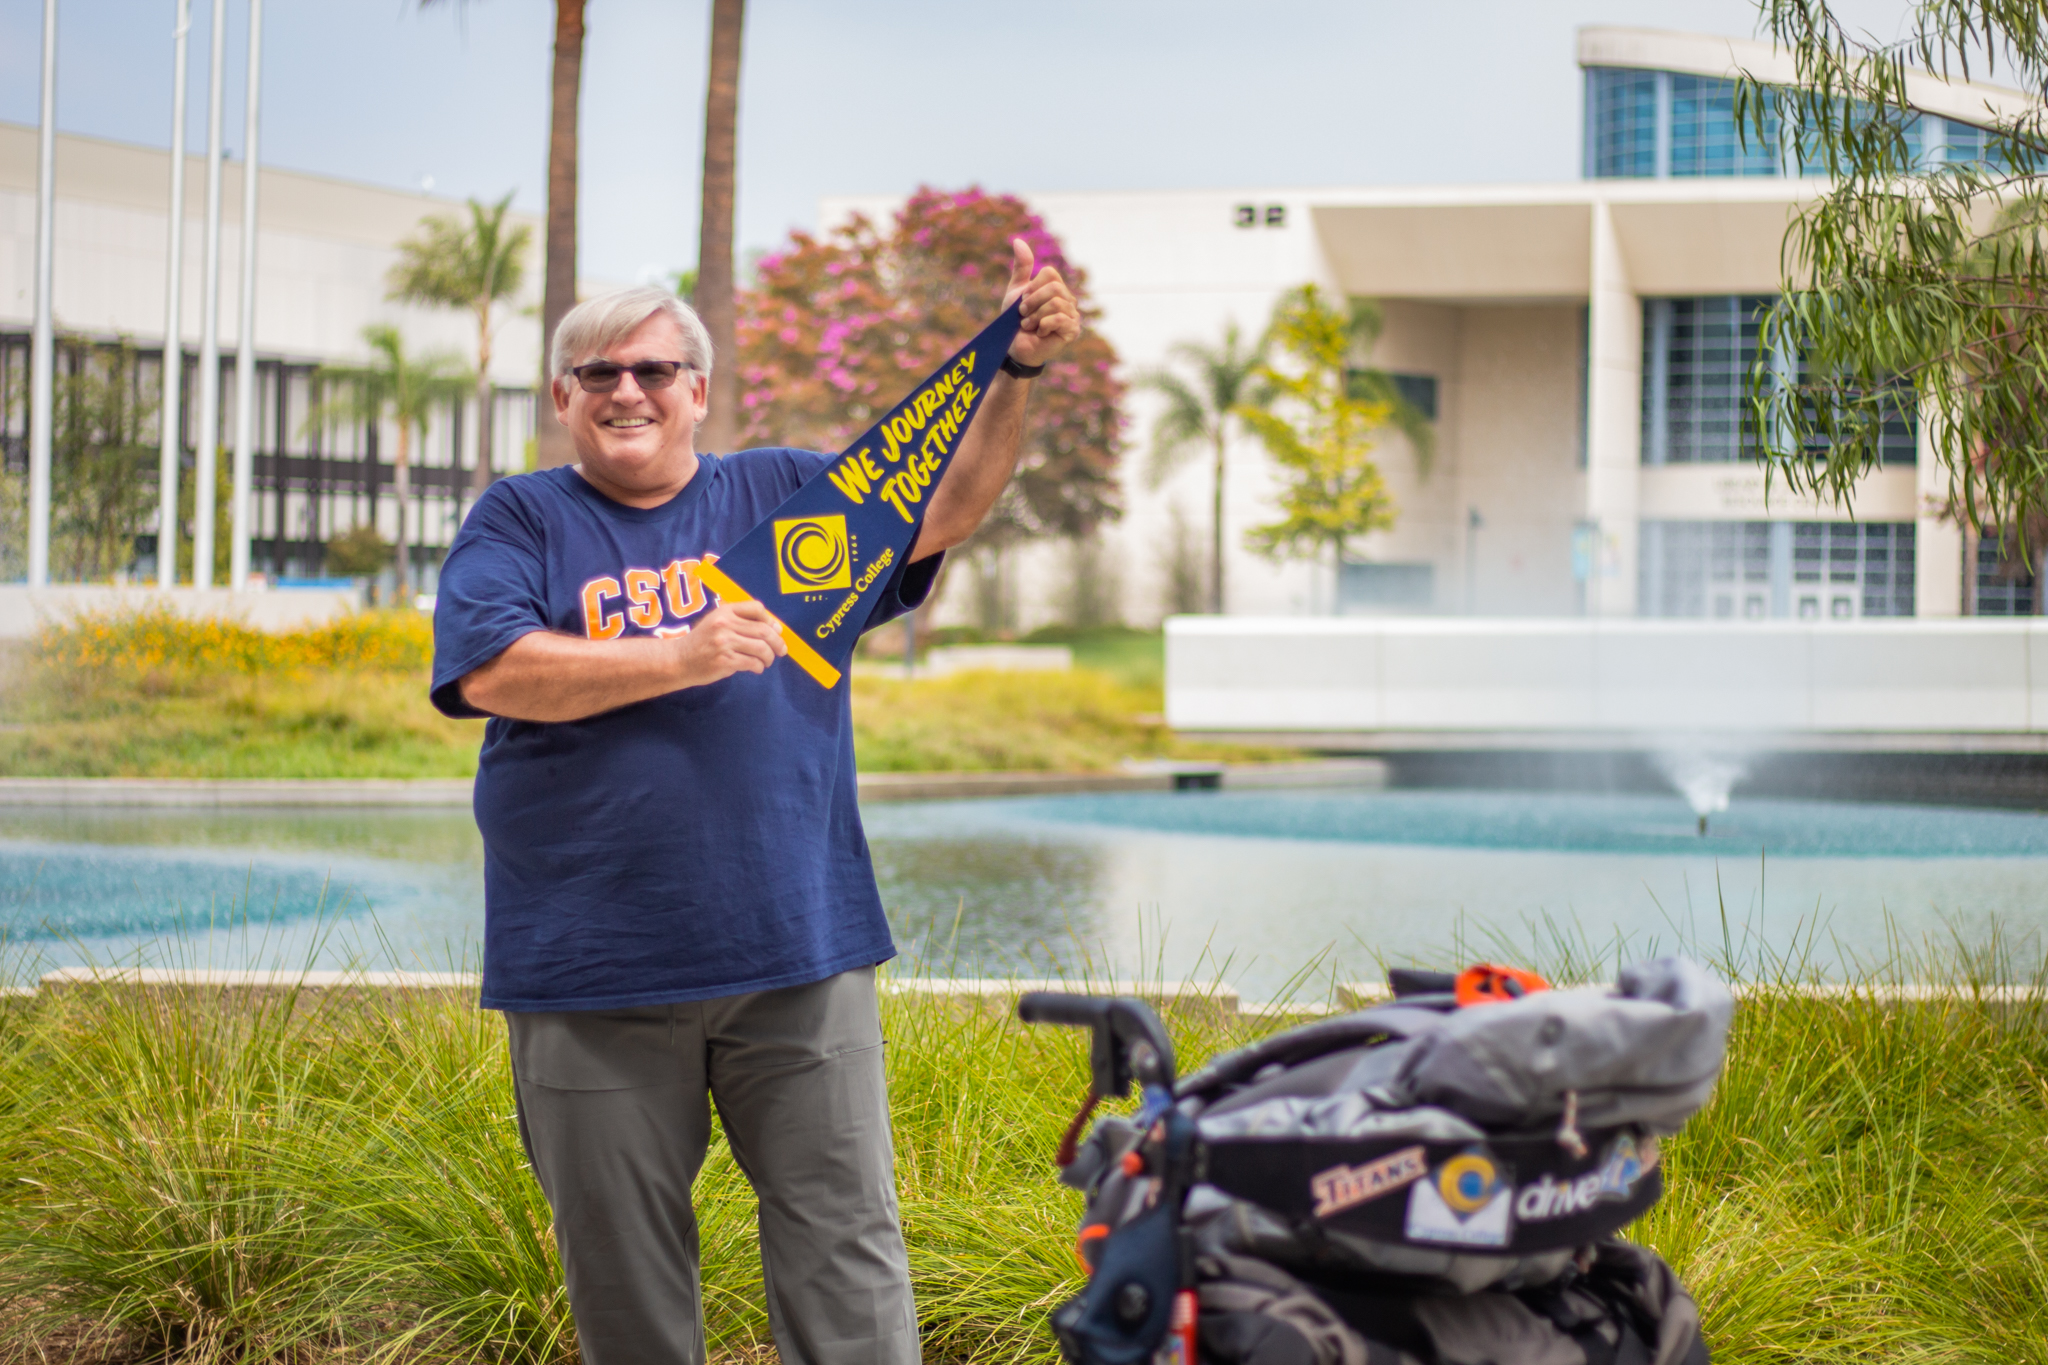 Patrick Hale proudly holds a Cypress College banner as he stands in front of the campus pond with his walker at his side.